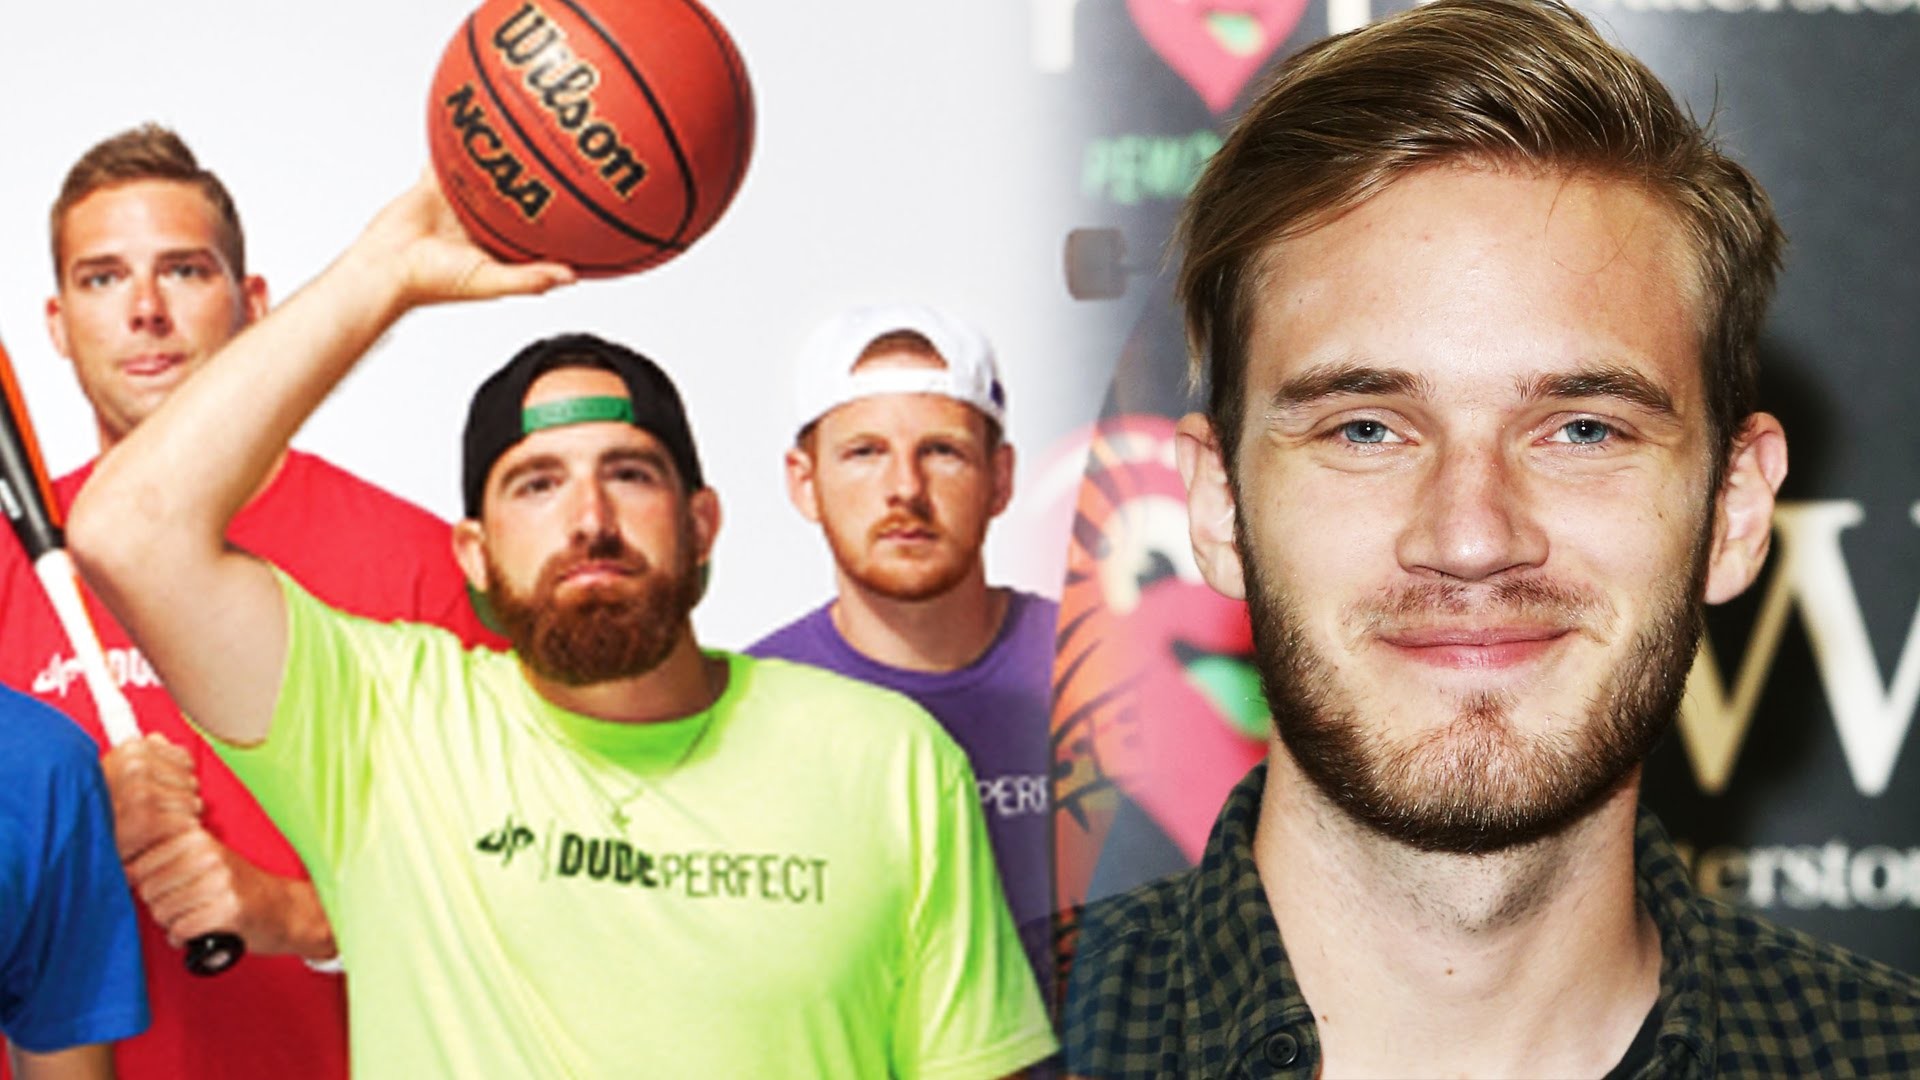 1920x1080 Dude Perfect YouTuber THREAT? PewDiePie & JackSepticEye UNVERIFIED! BIG  YouTuber EXPOSED in Public - YouTube